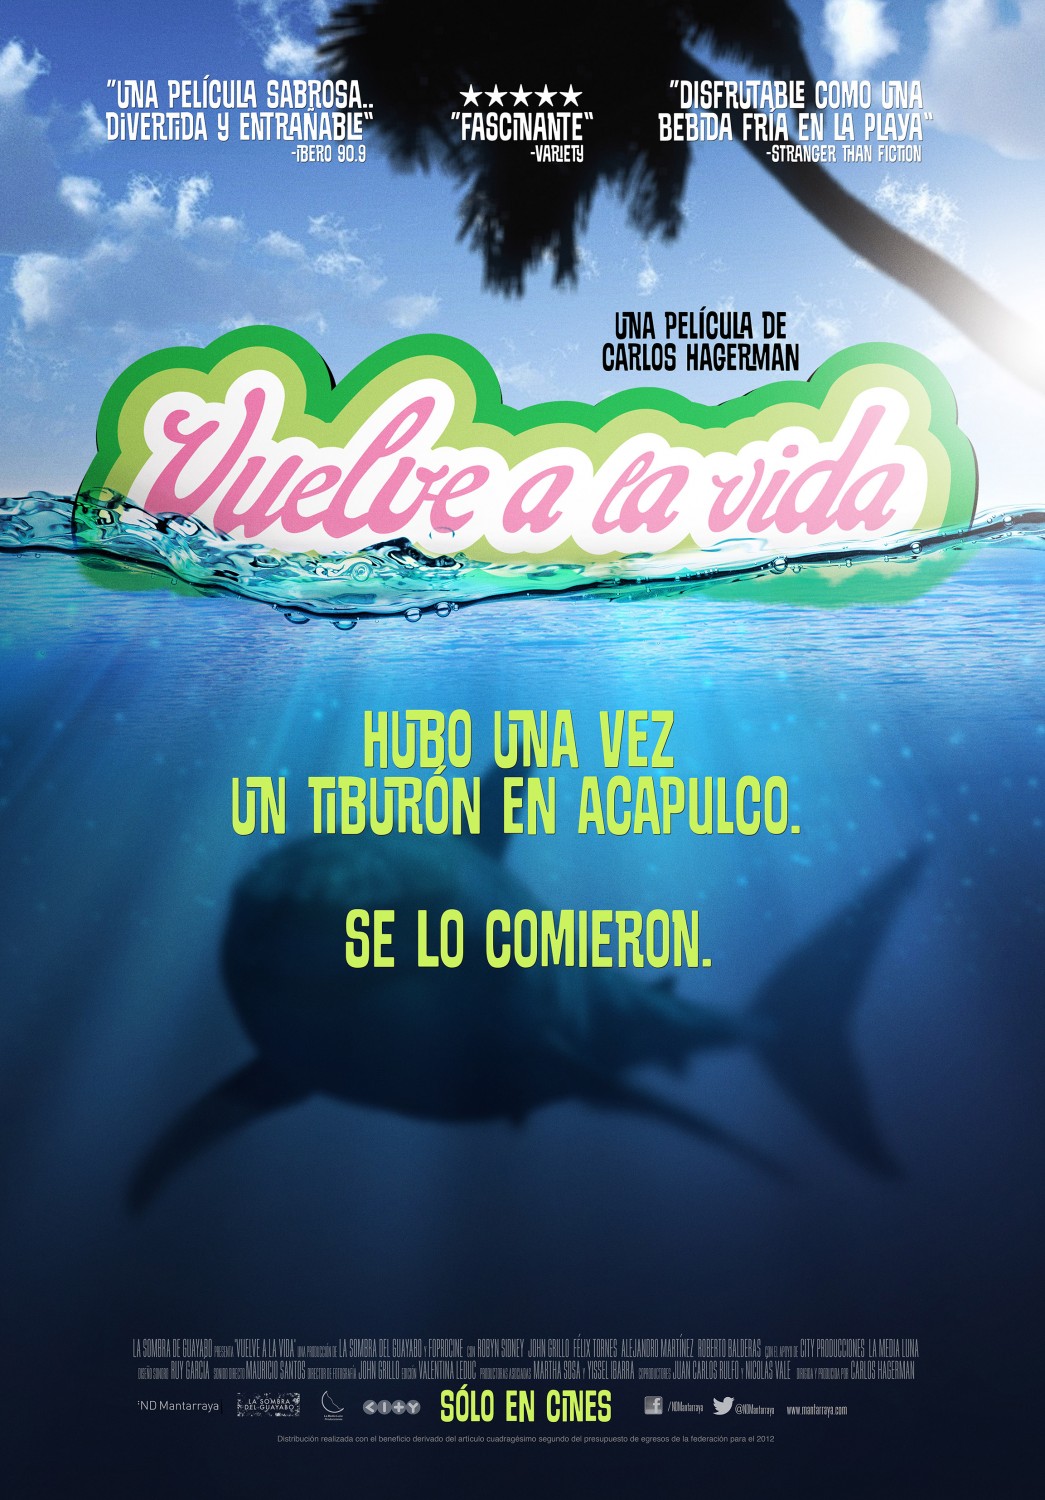 Extra Large Movie Poster Image for Vuelve a la vida 